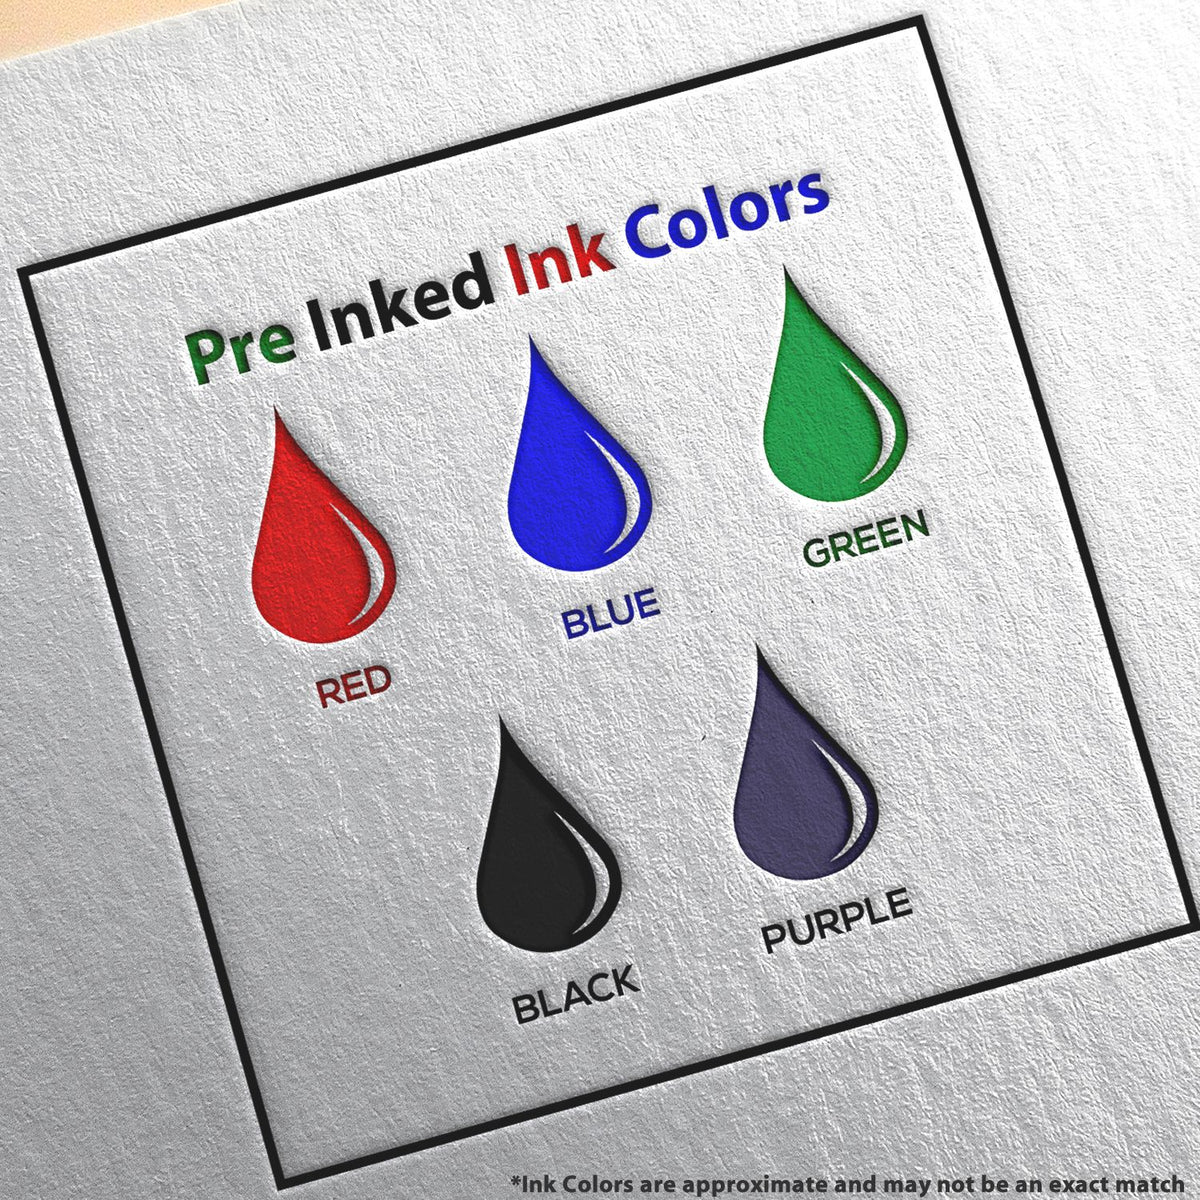 A picture showing the different ink colors or hues available for the PSI Maryland Notary Stamp product.